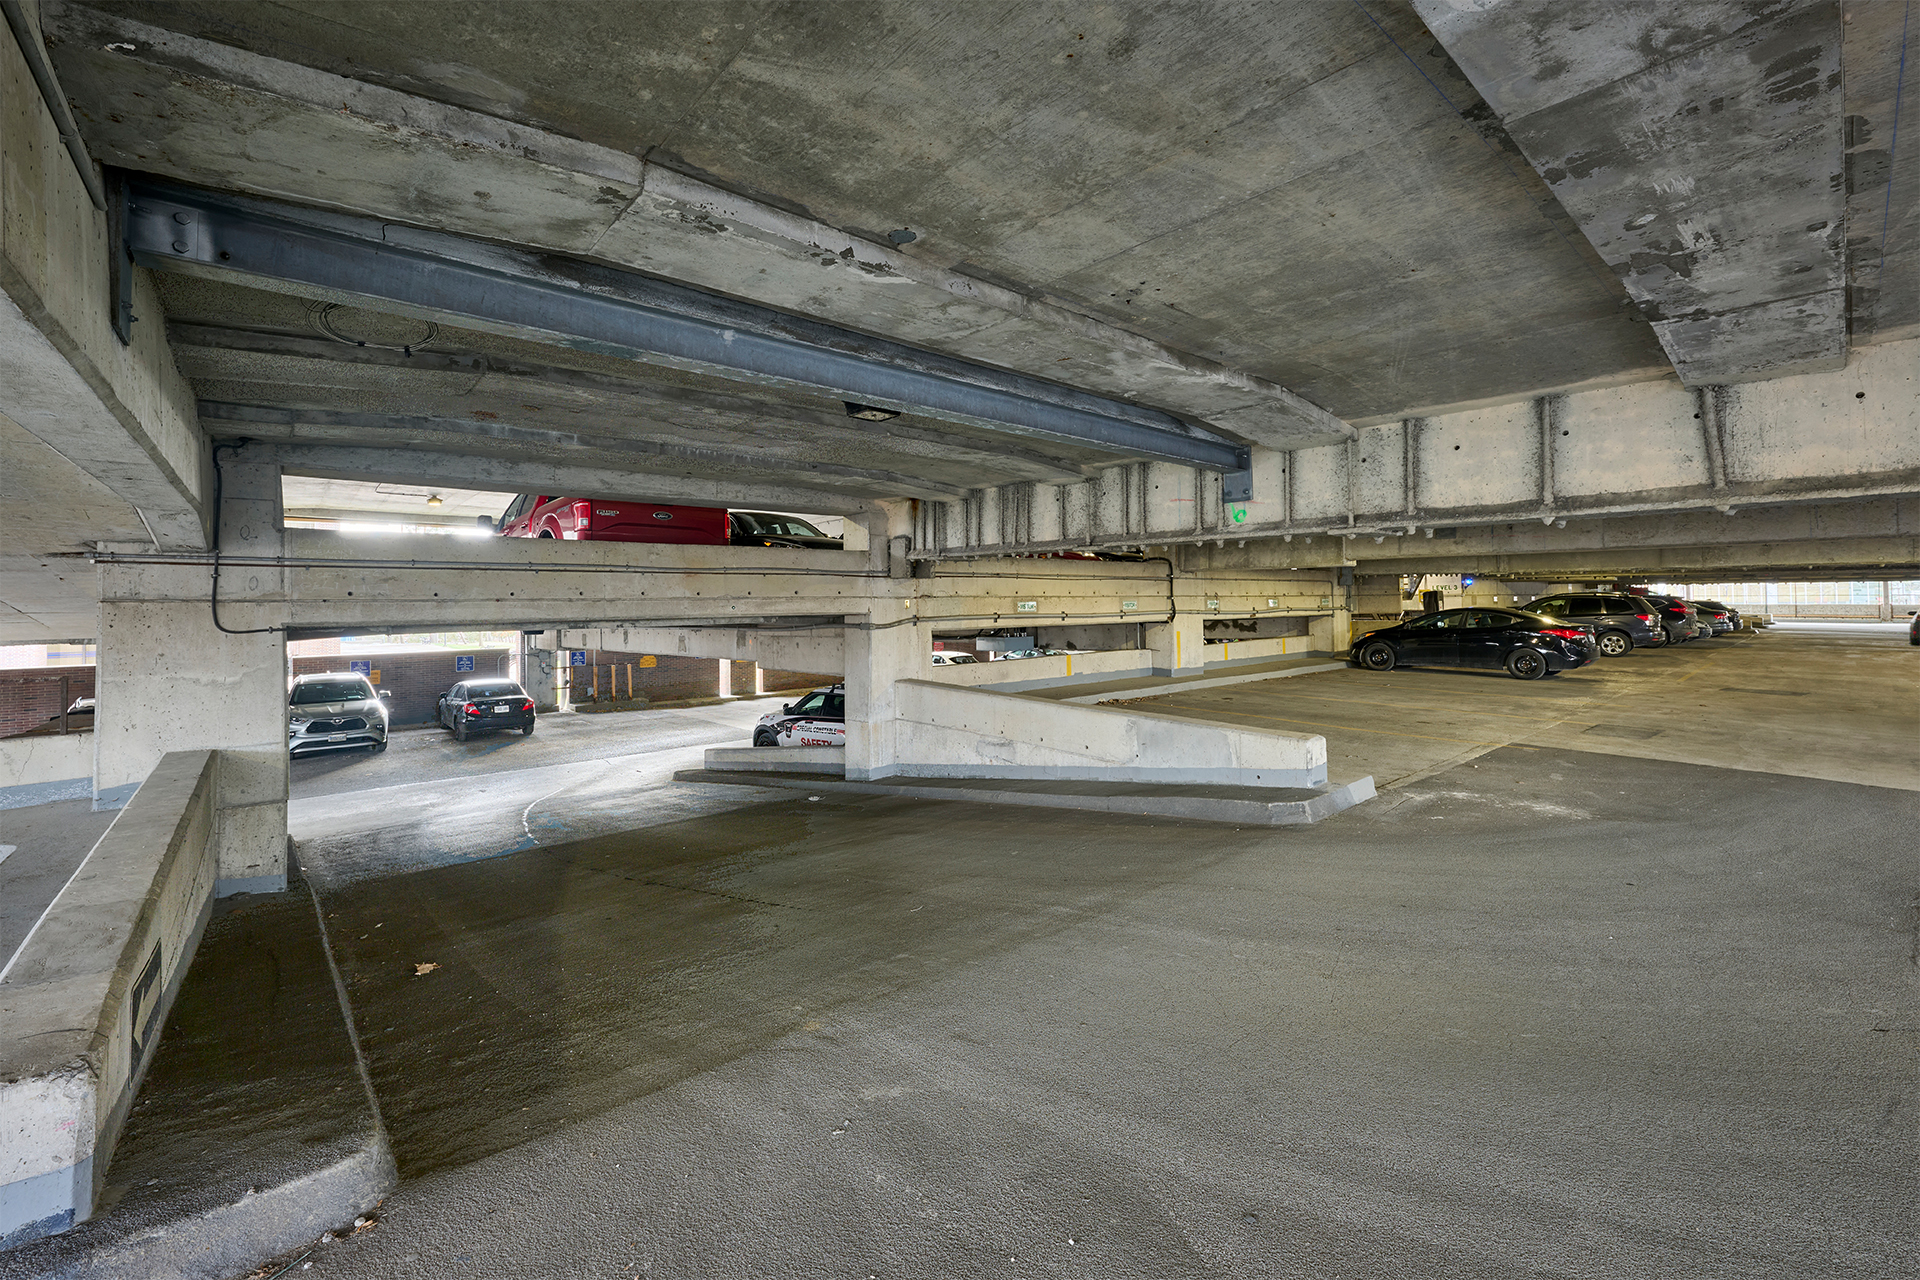 Interior of Carleton University's Parking 9 showing vehicles parked on multiple levels, concrete pillars, and overhead beams